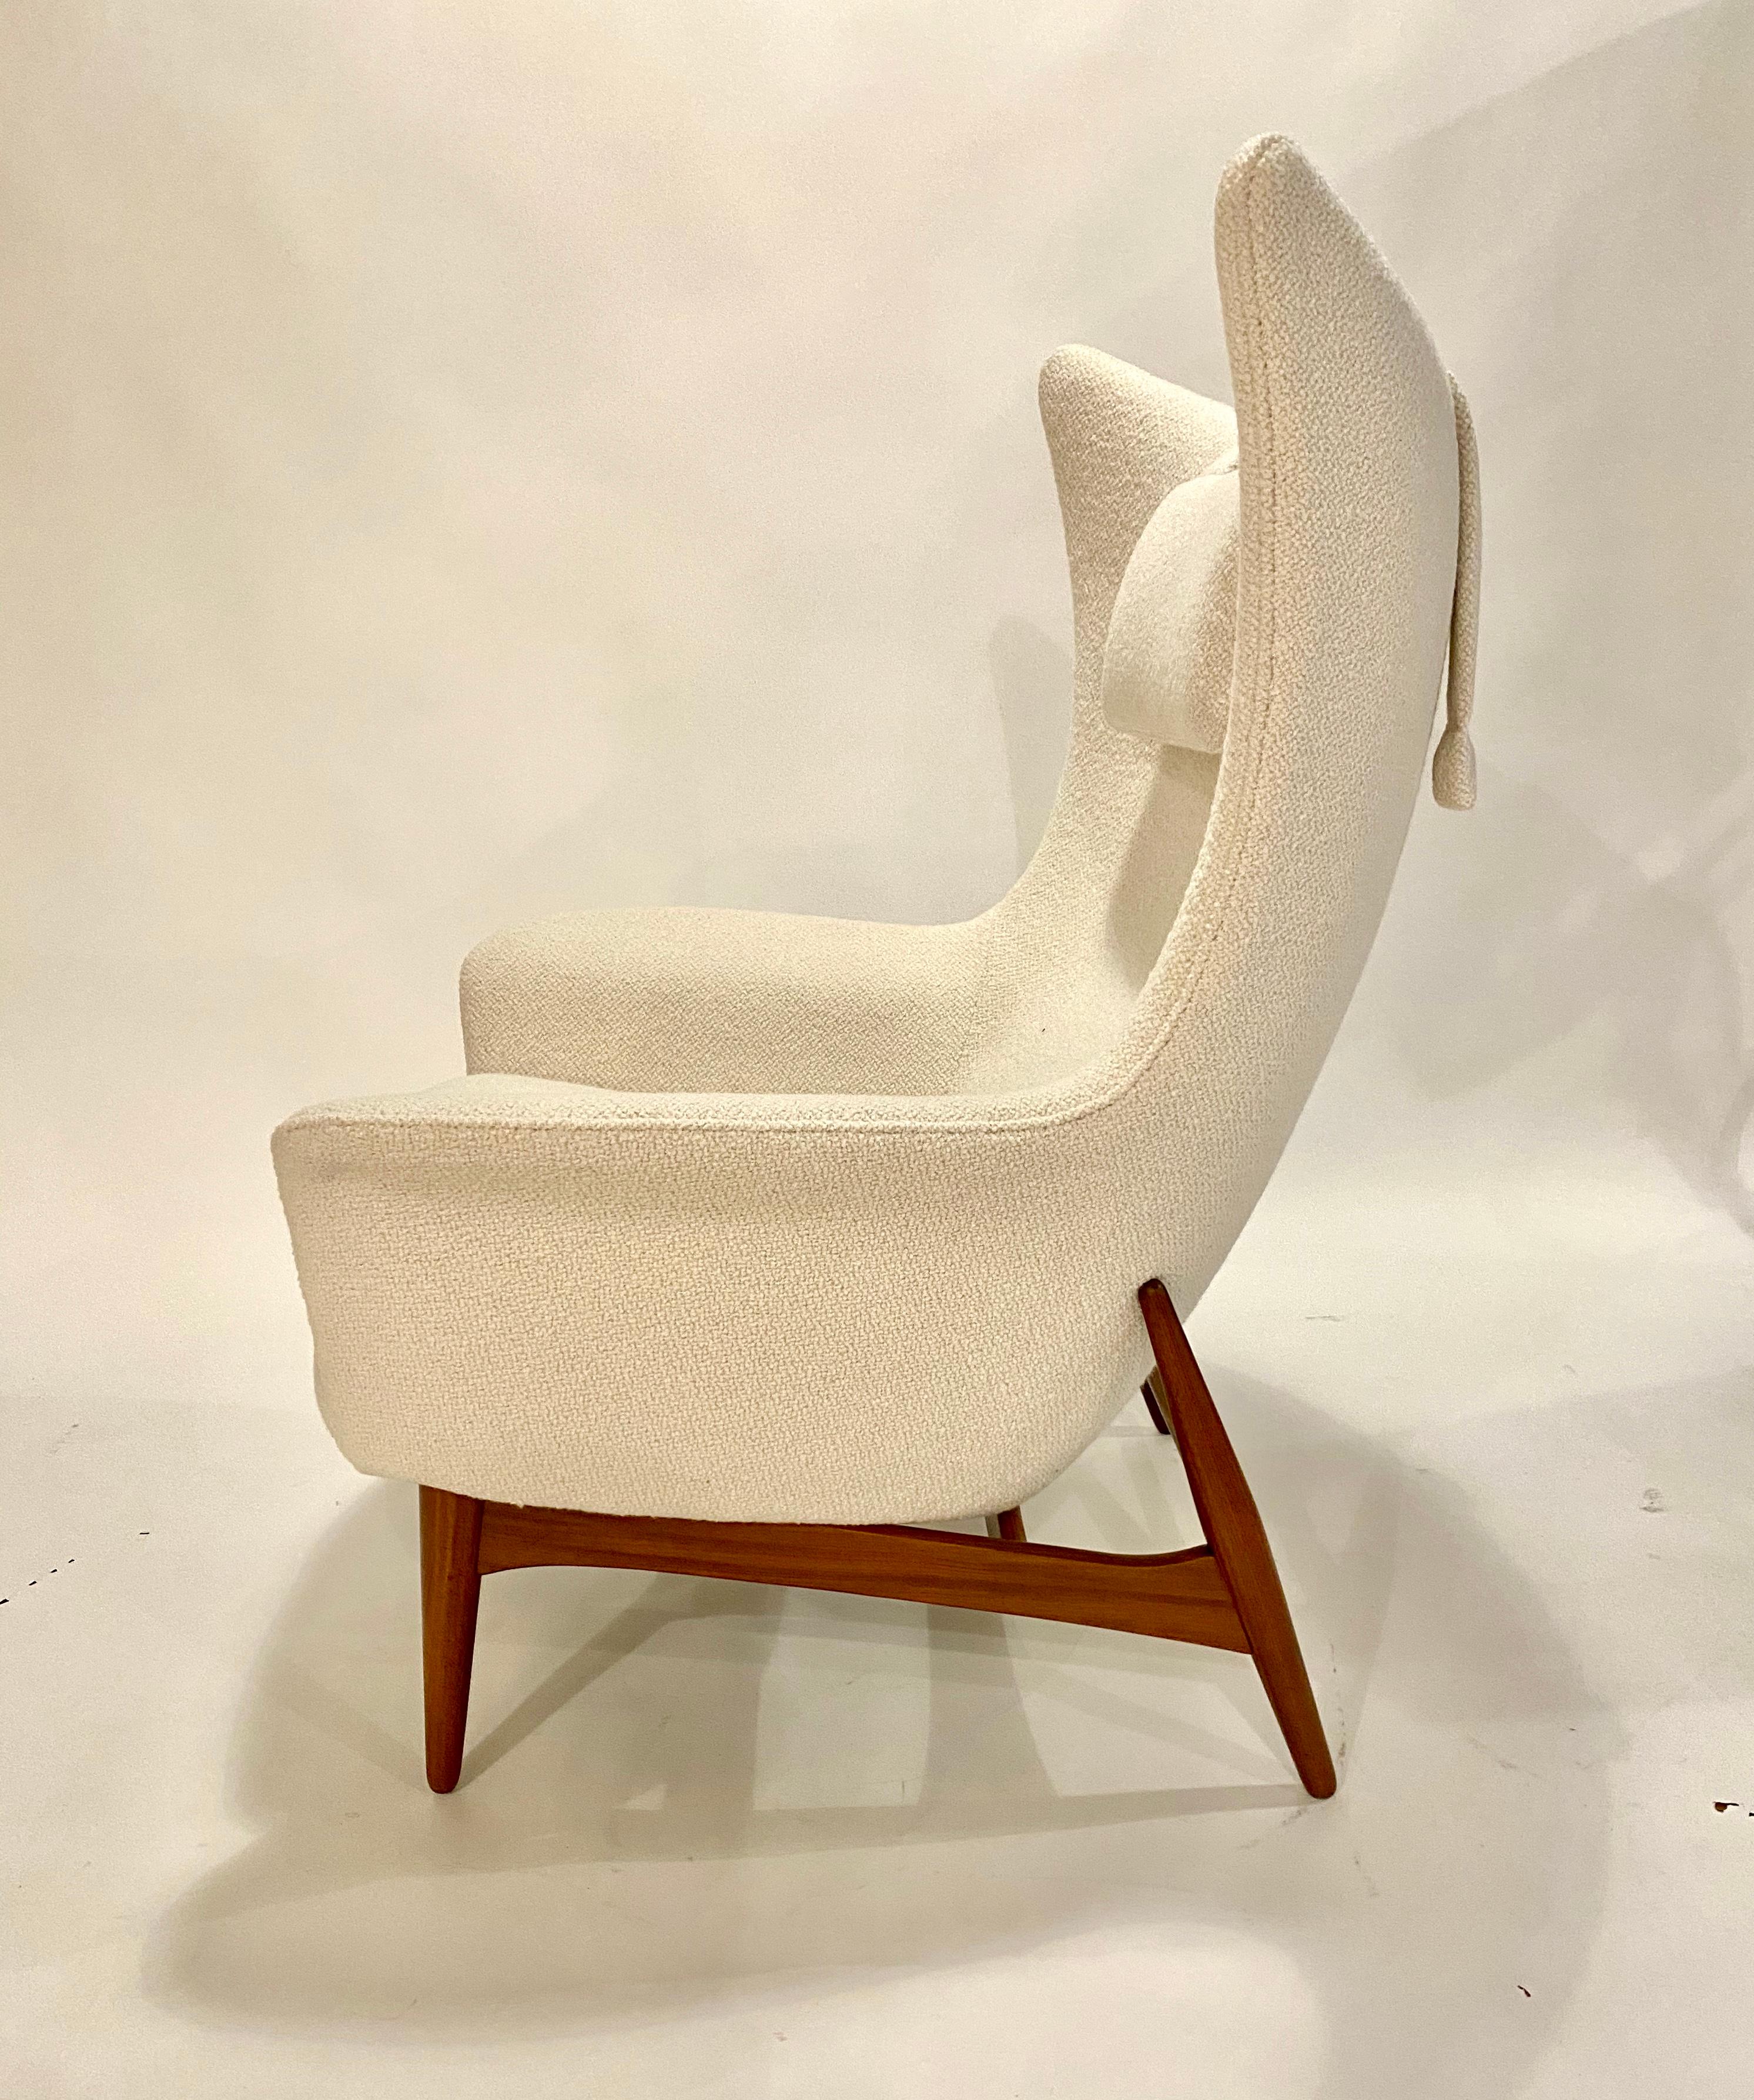 Model 207/5 midcentury Danish modern wingback lounge chair designed by Henry Walter Klein for NA Jorgensens Mobelfabrik aka Bramin Mobler, 1960s. Professionally restored and reupholstered in an Italian ivory bouclé.